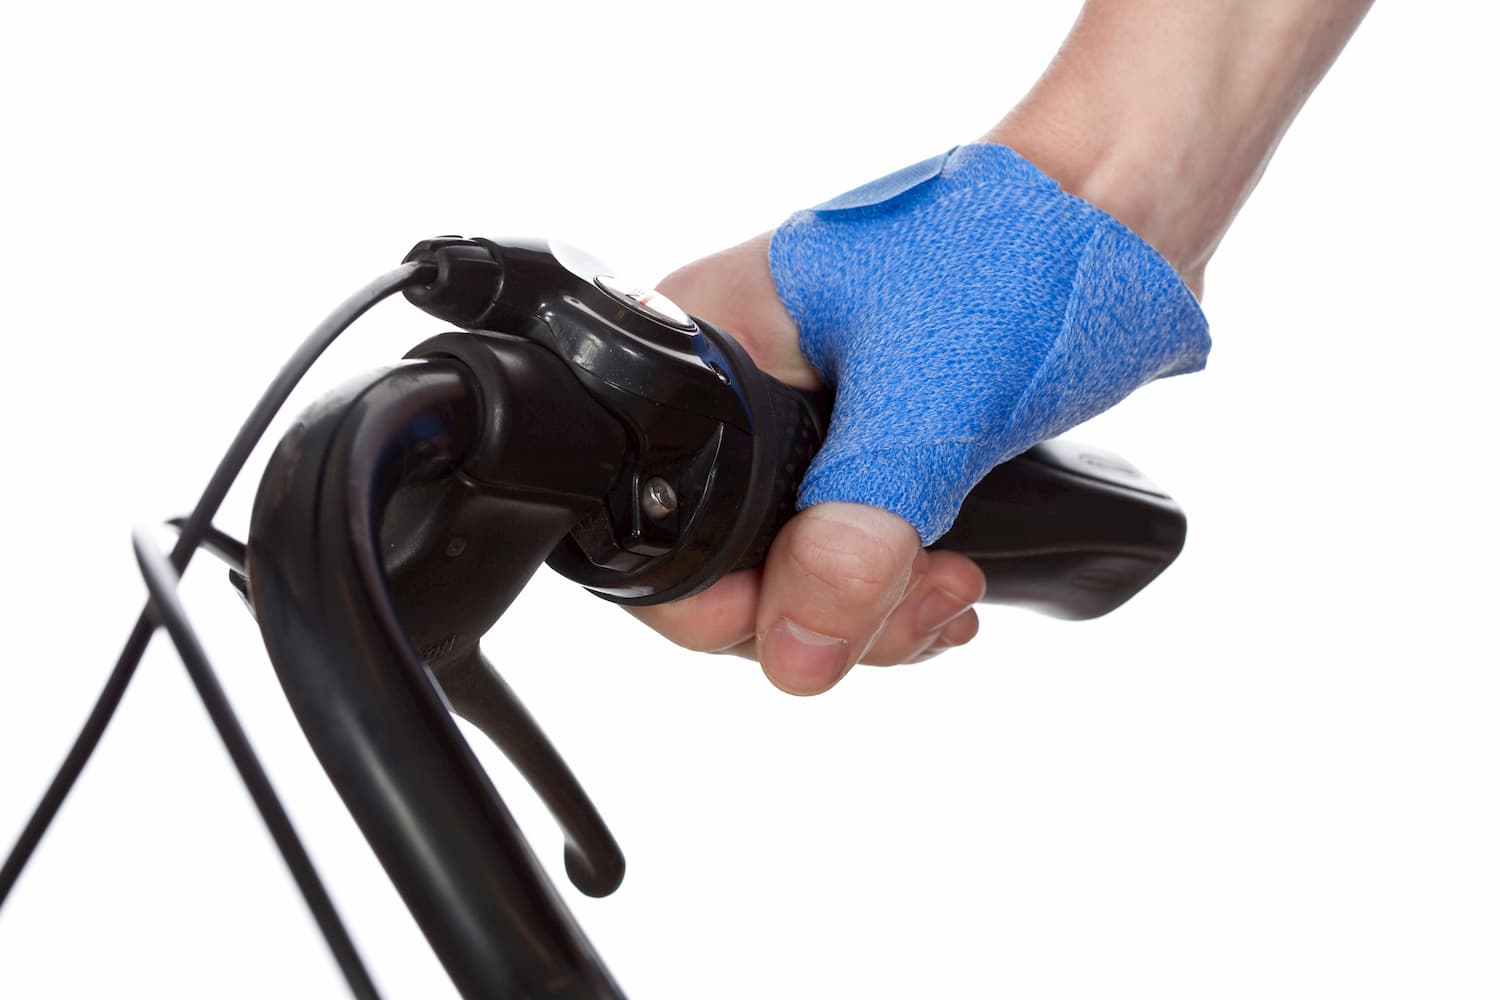 Short thumb opponens orthosis and bicycle